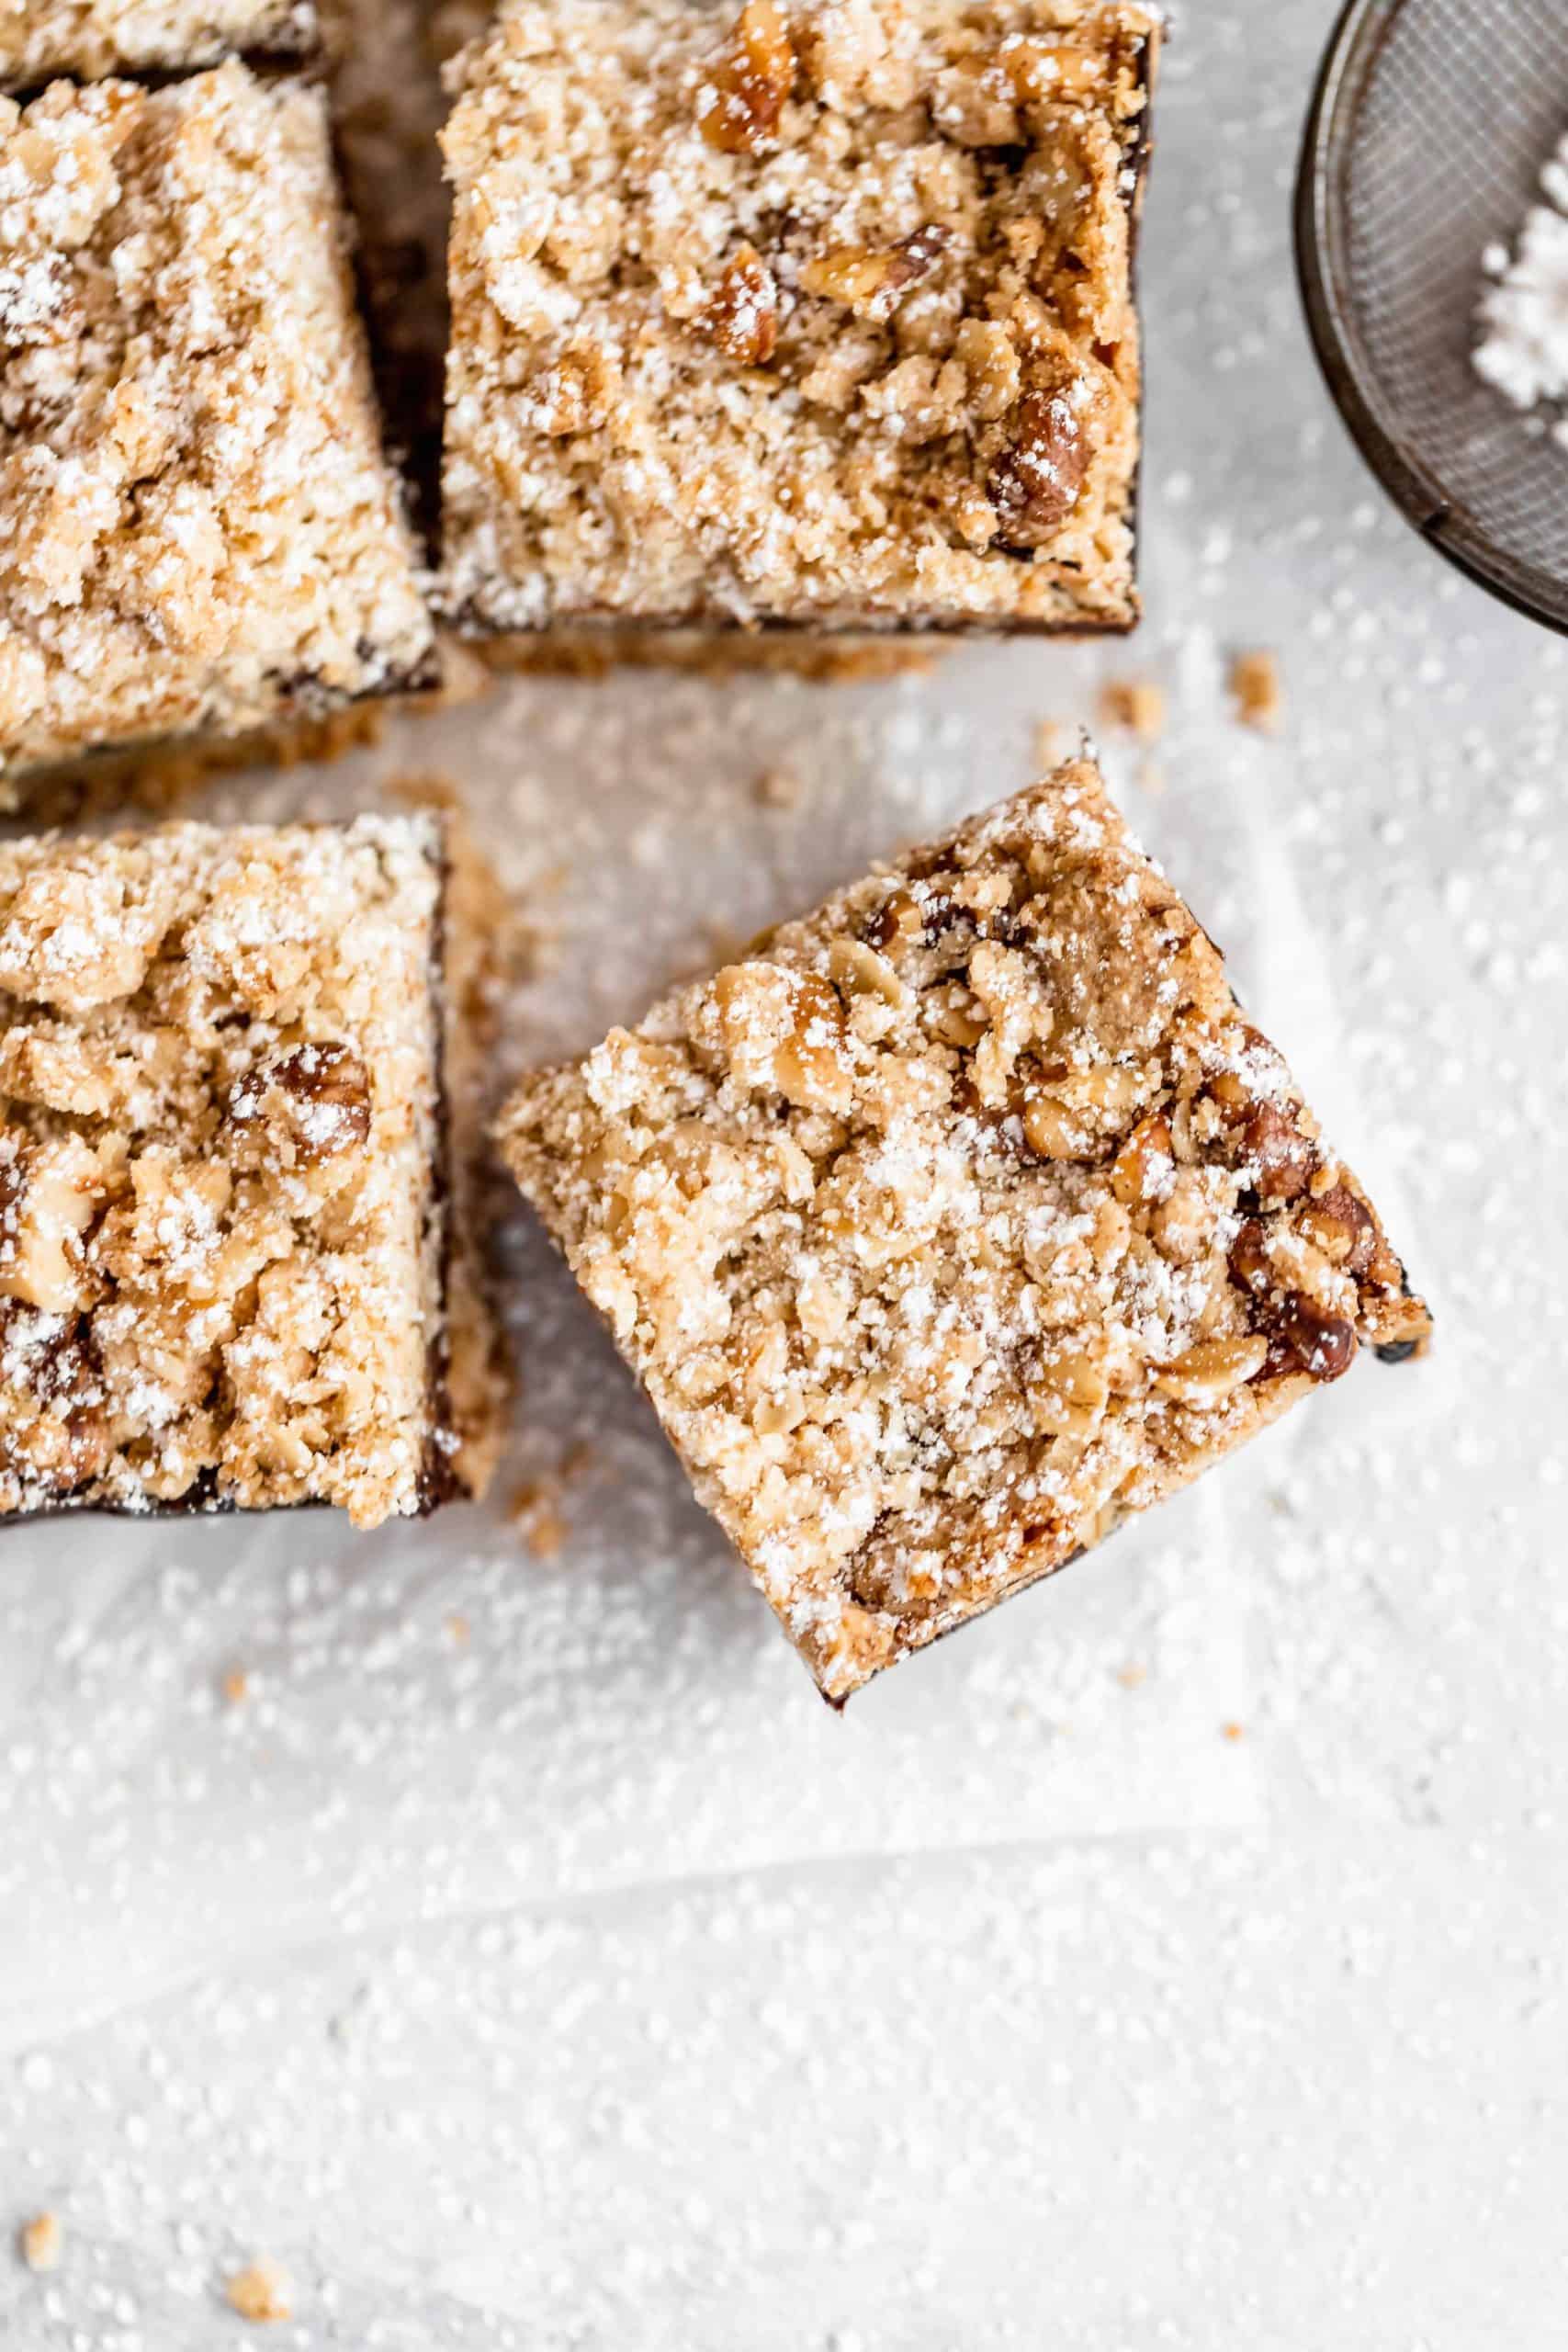 chocolate crumb bars on parchment paper